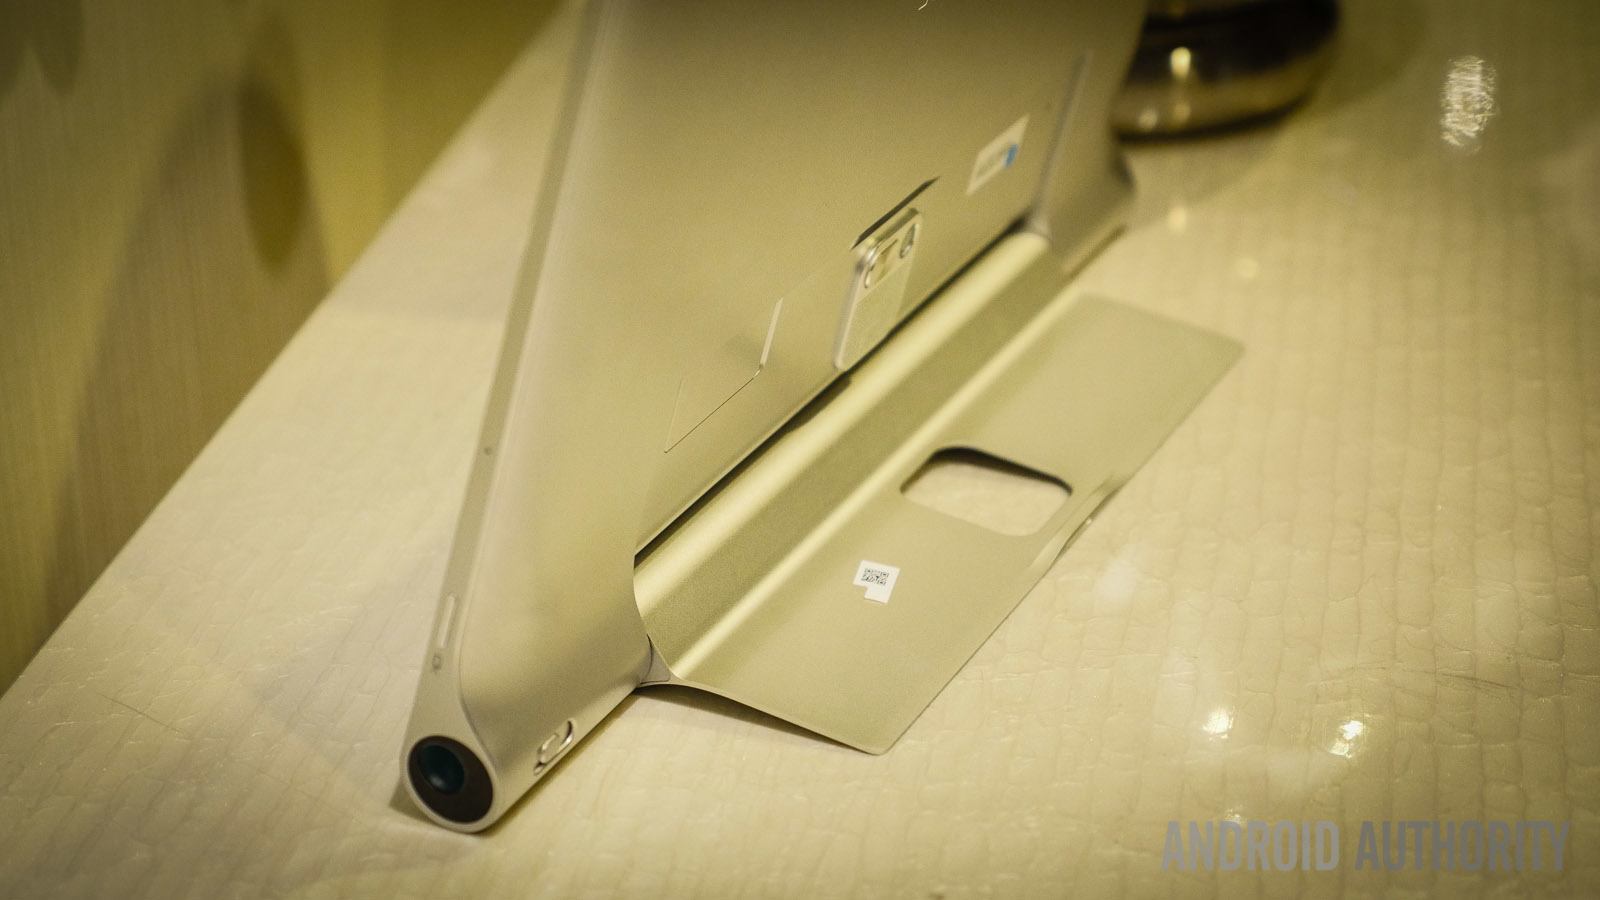 lenovo yoga tablet 2 pro first look aa (6 of 19)